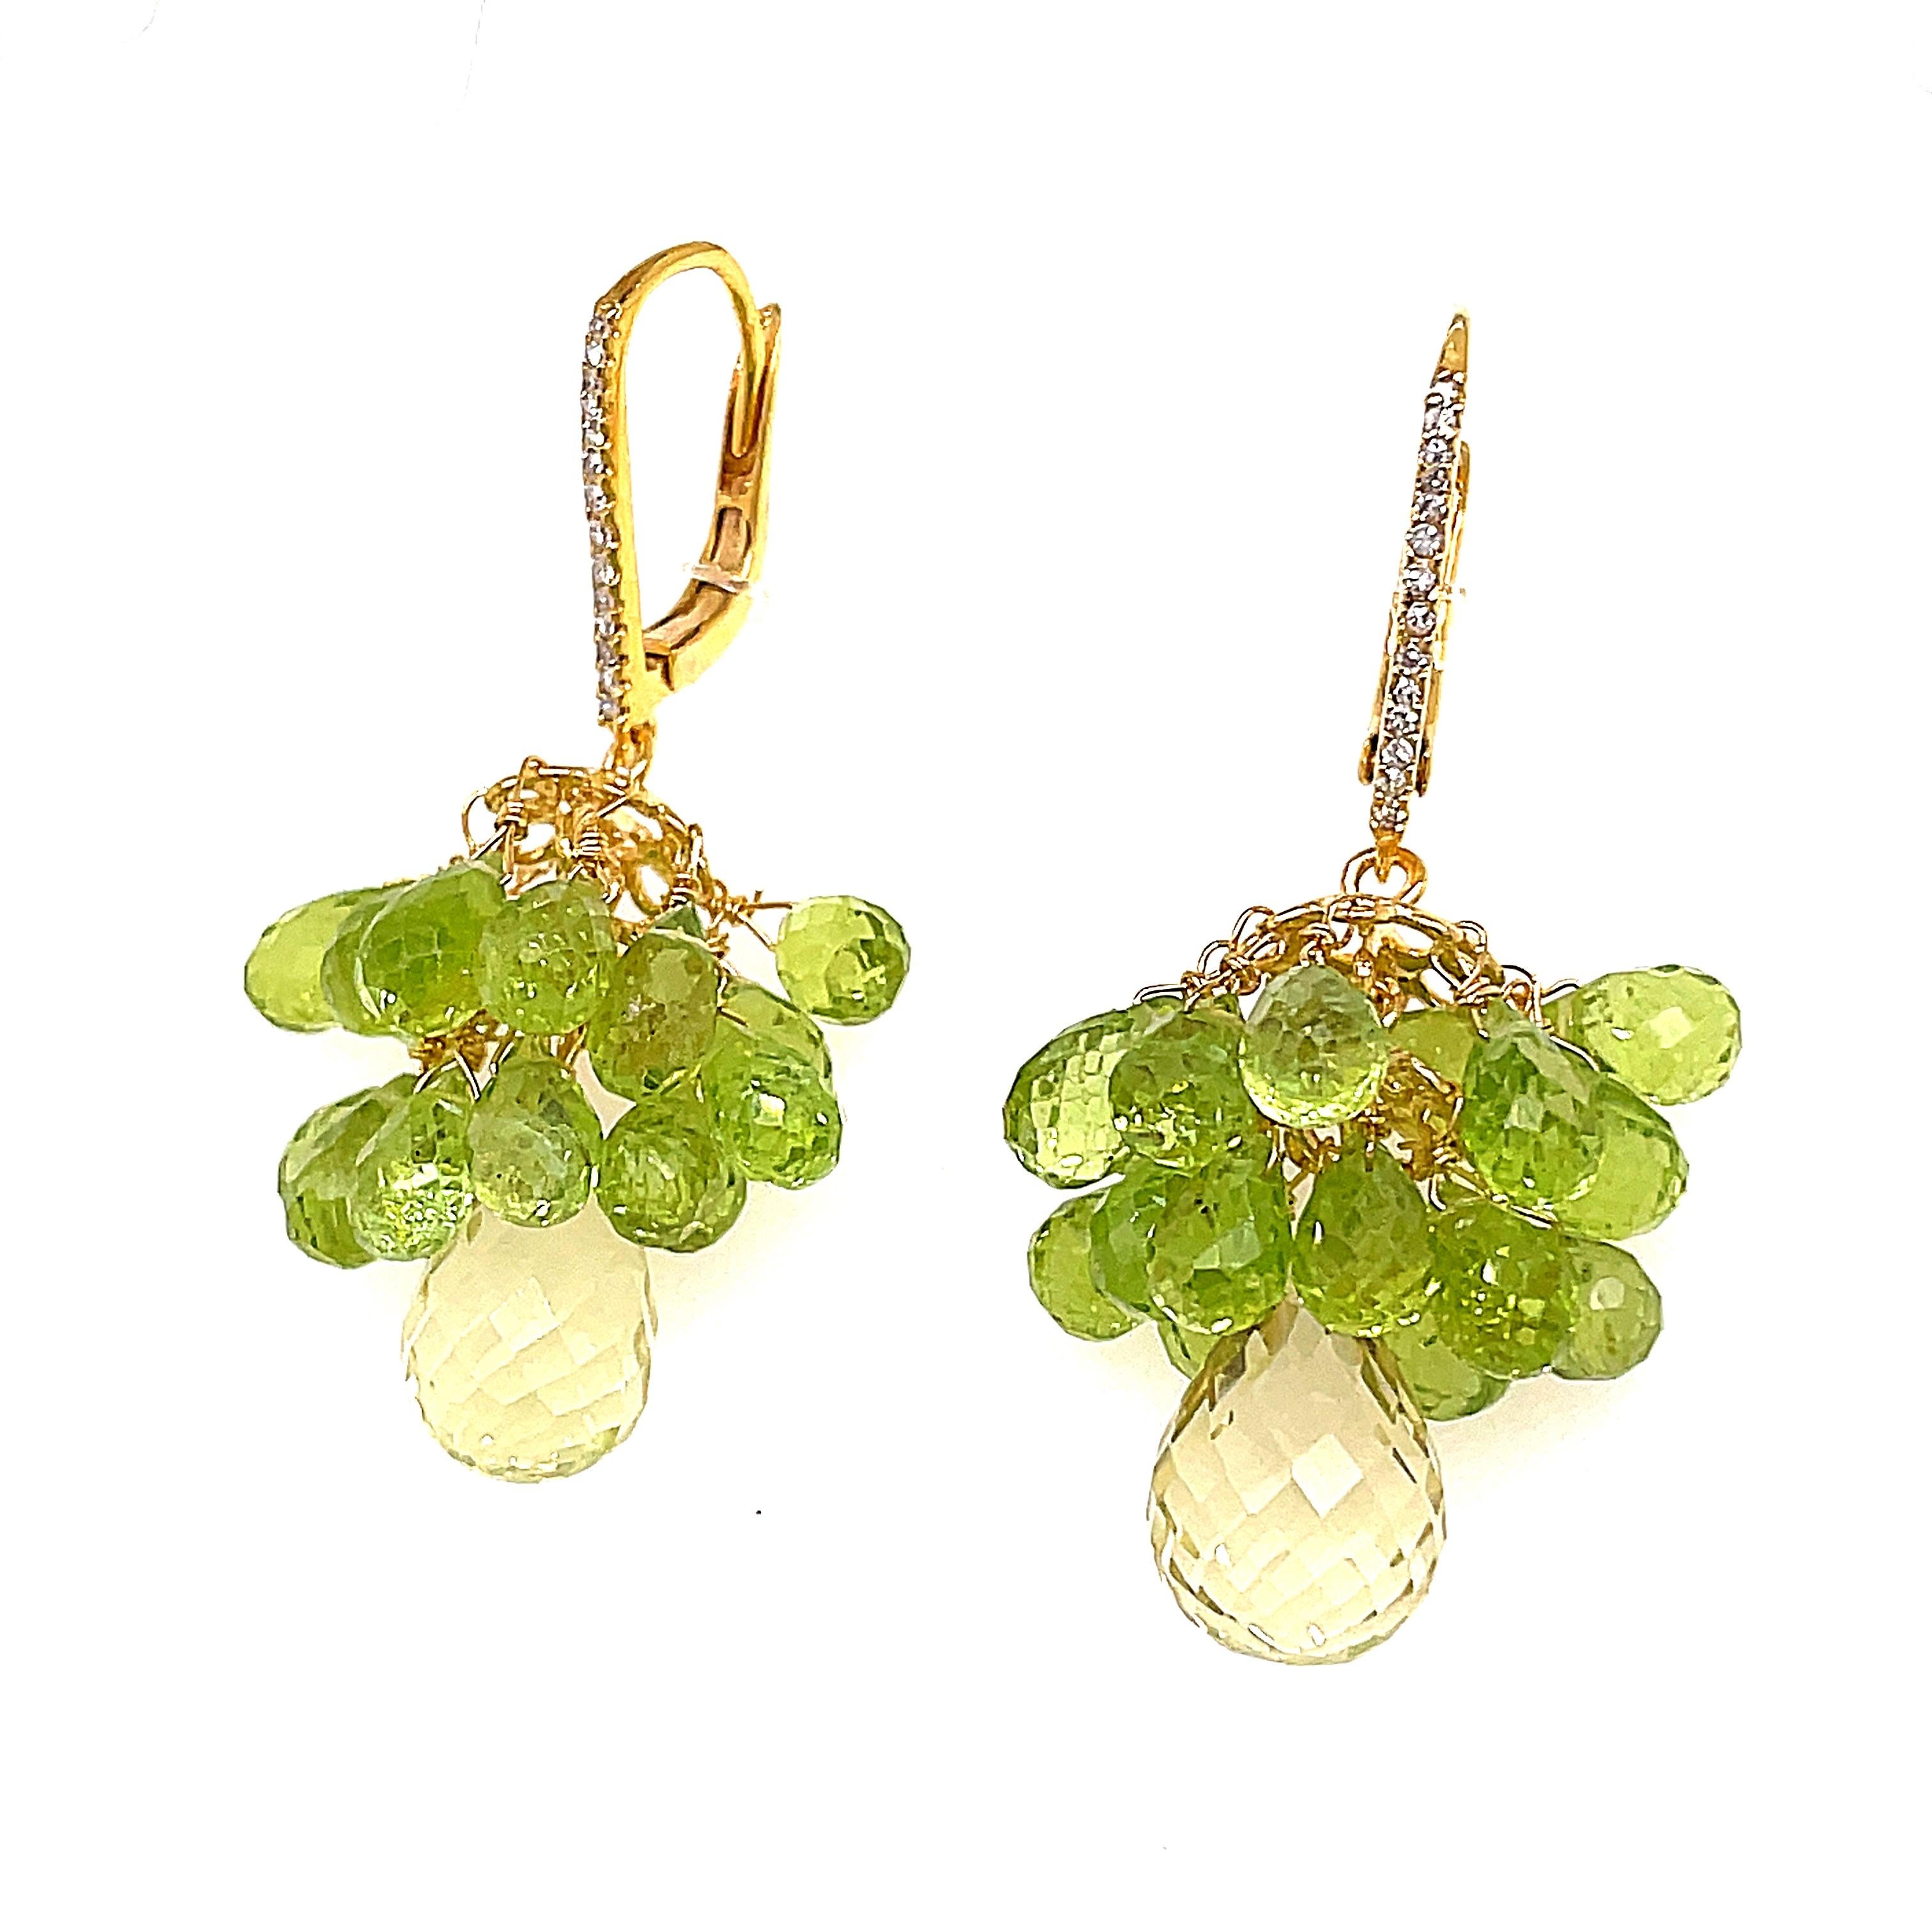 18K White Gold Briolette Cut Peridot Drop Earrings 

These exquisite earrings are more than just jewelry; they're a celebration of Earth's treasures.

Each peridot stone has been masterfully faceted to reveal its maximum brilliance, and atop it, an